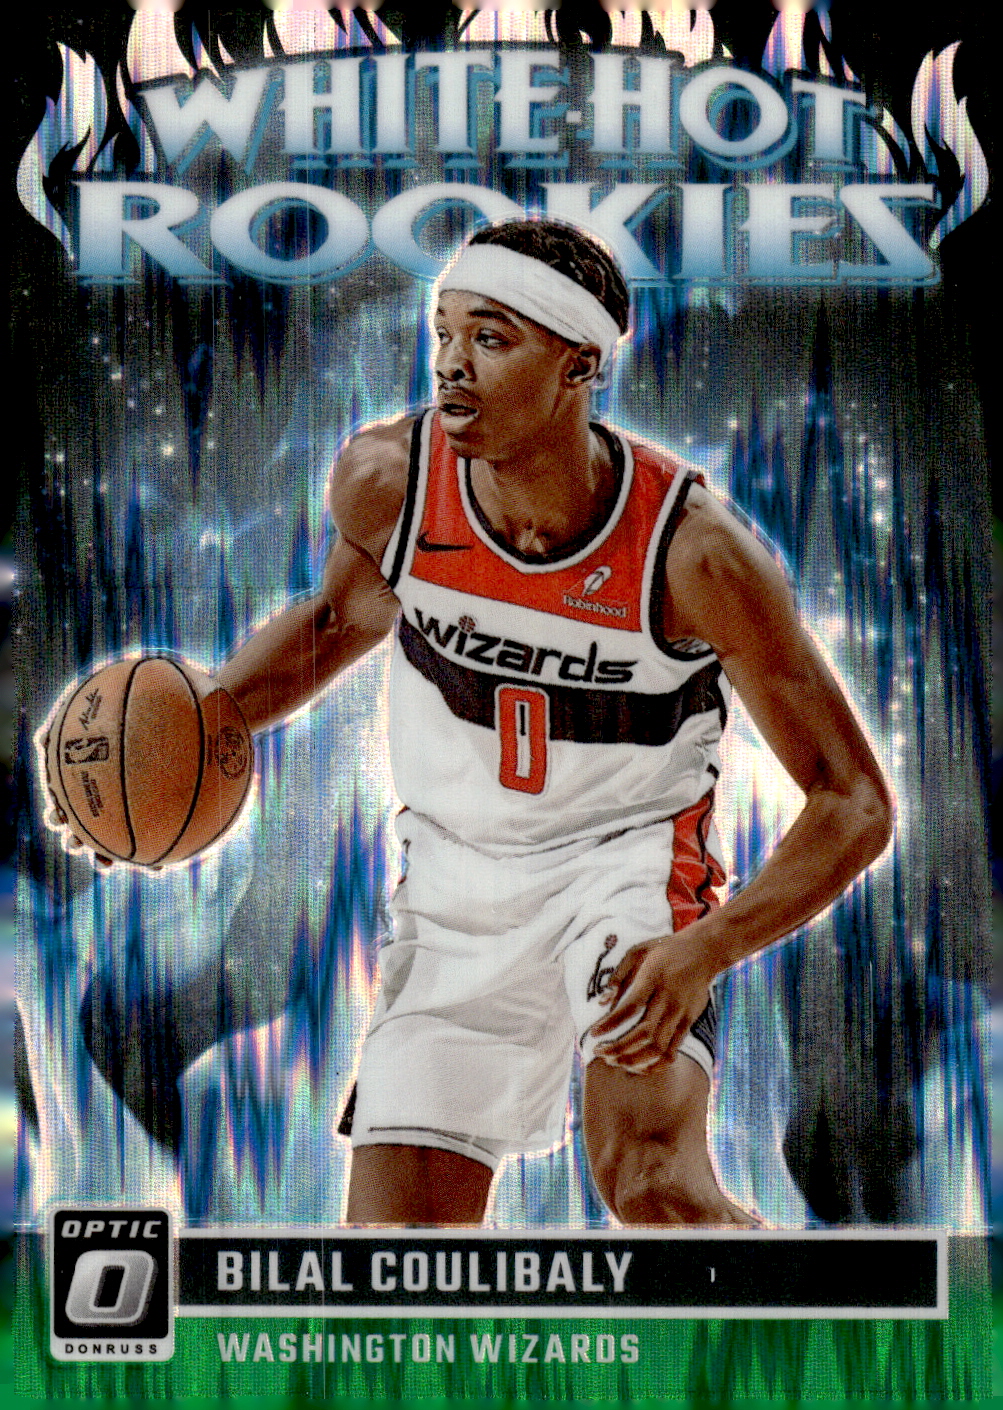 2023-24 Donruss Optic White Hot Rookies Green Shock #4 Bilal Coulibaly